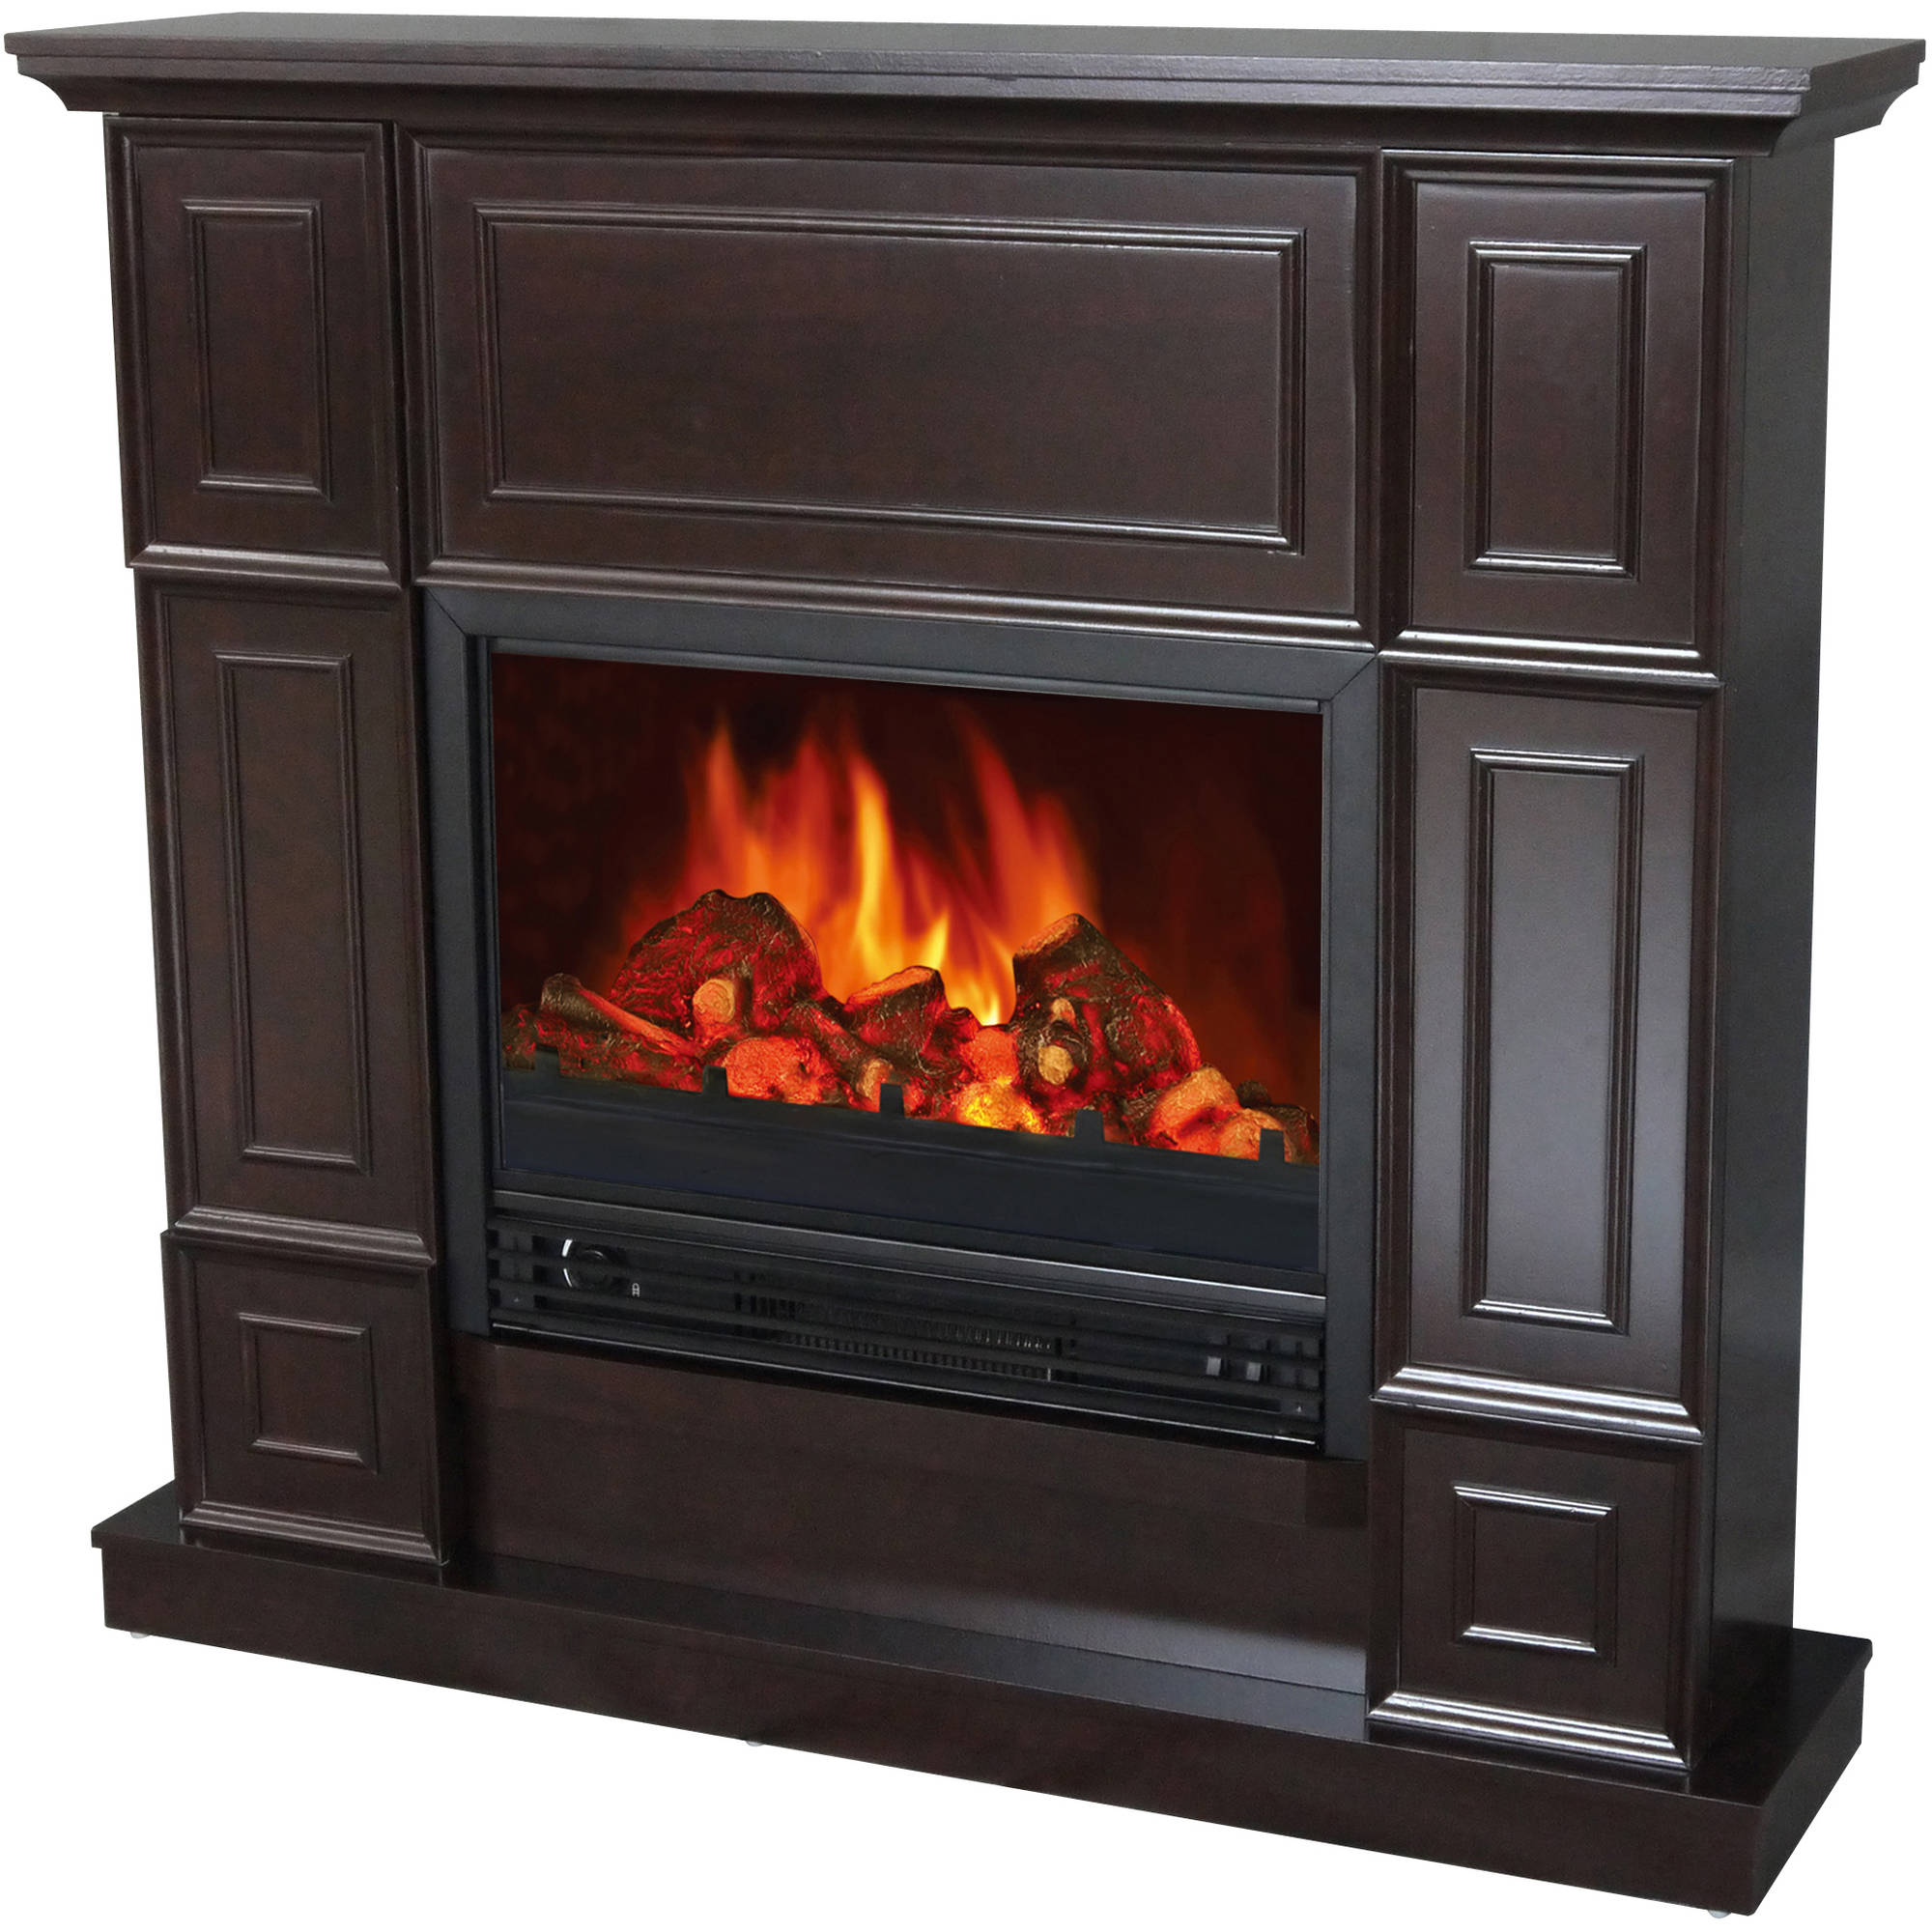 Decor-Flame electric fireplace space heater with 44″ mantle for $99